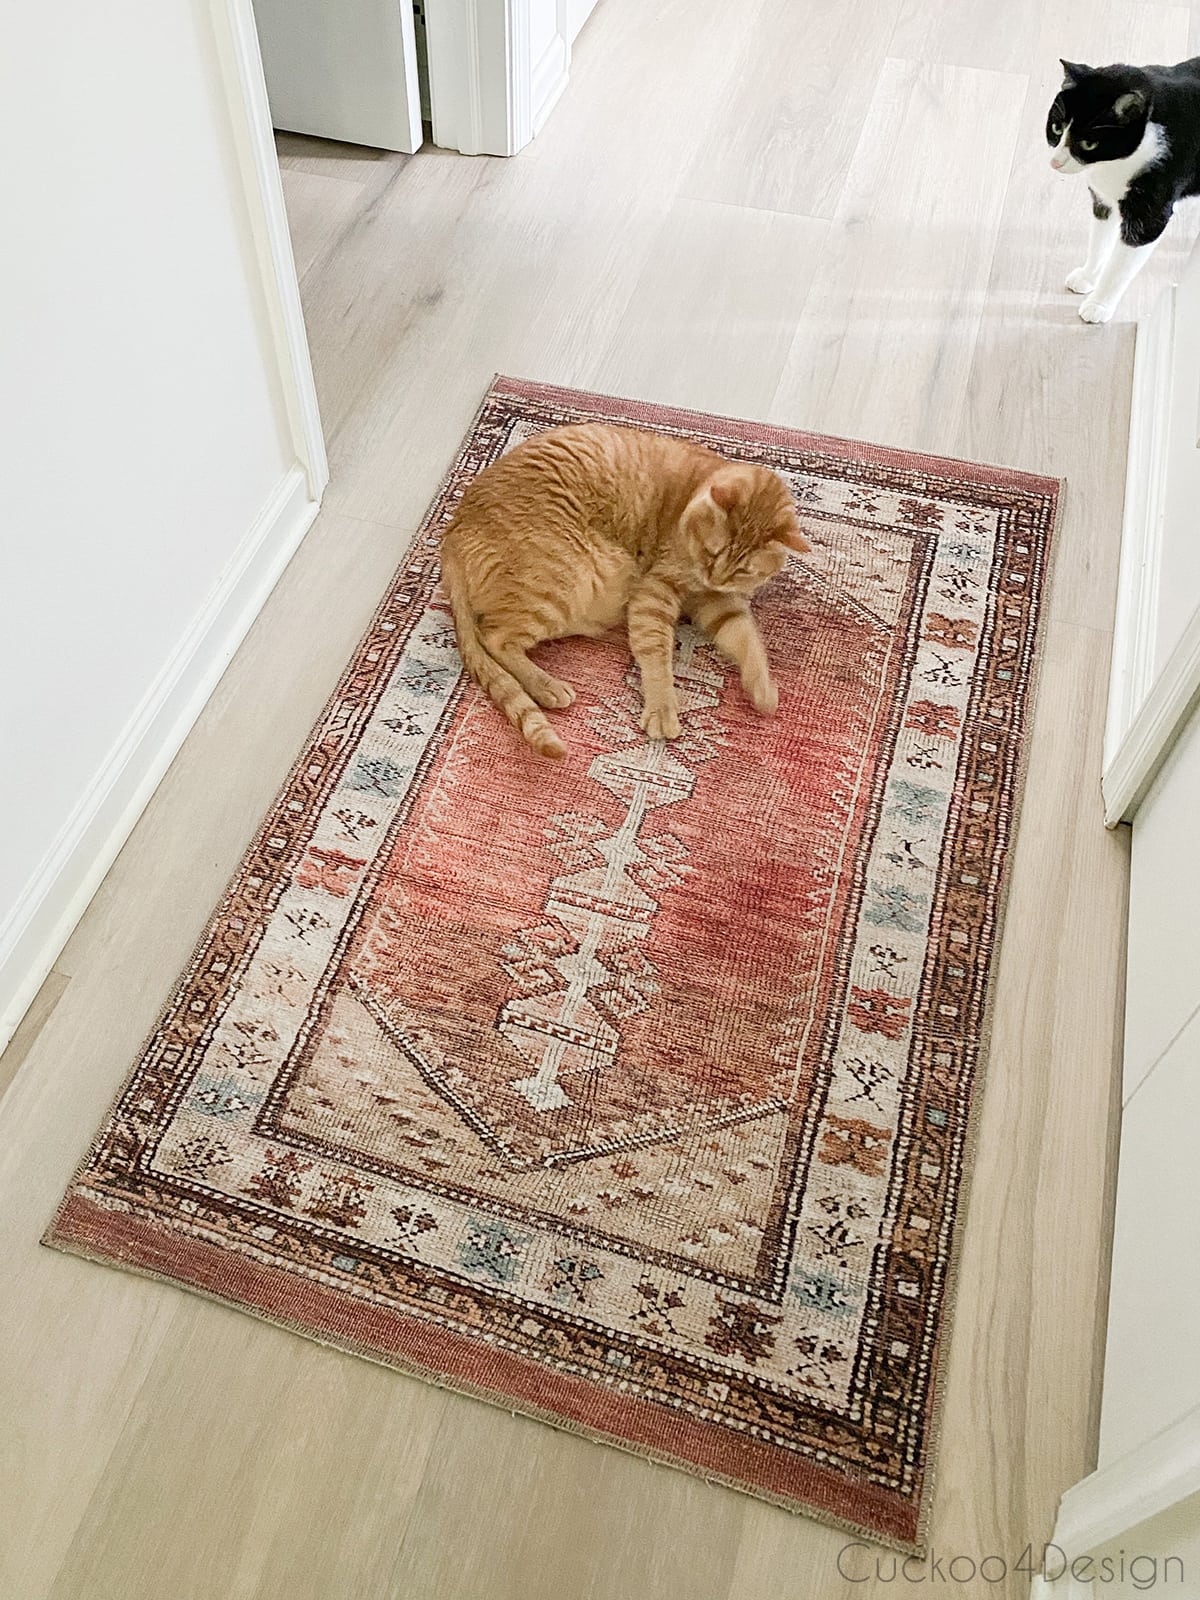 cat laying on red World Market Izmir Terracotta and Beige Persian Style Area Rug